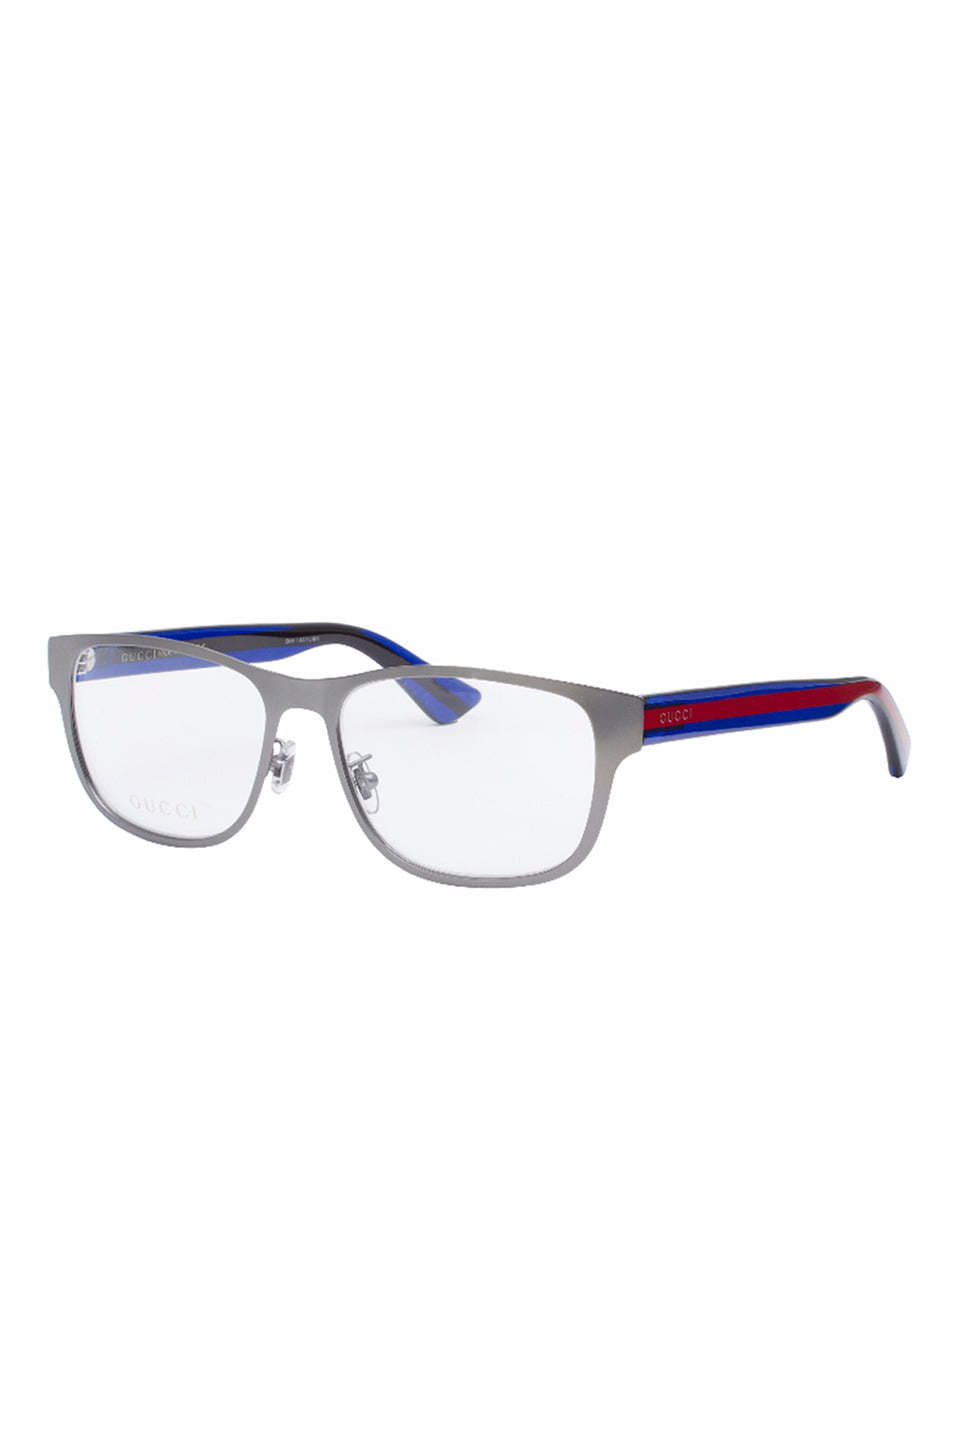 blue and red gucci glasses